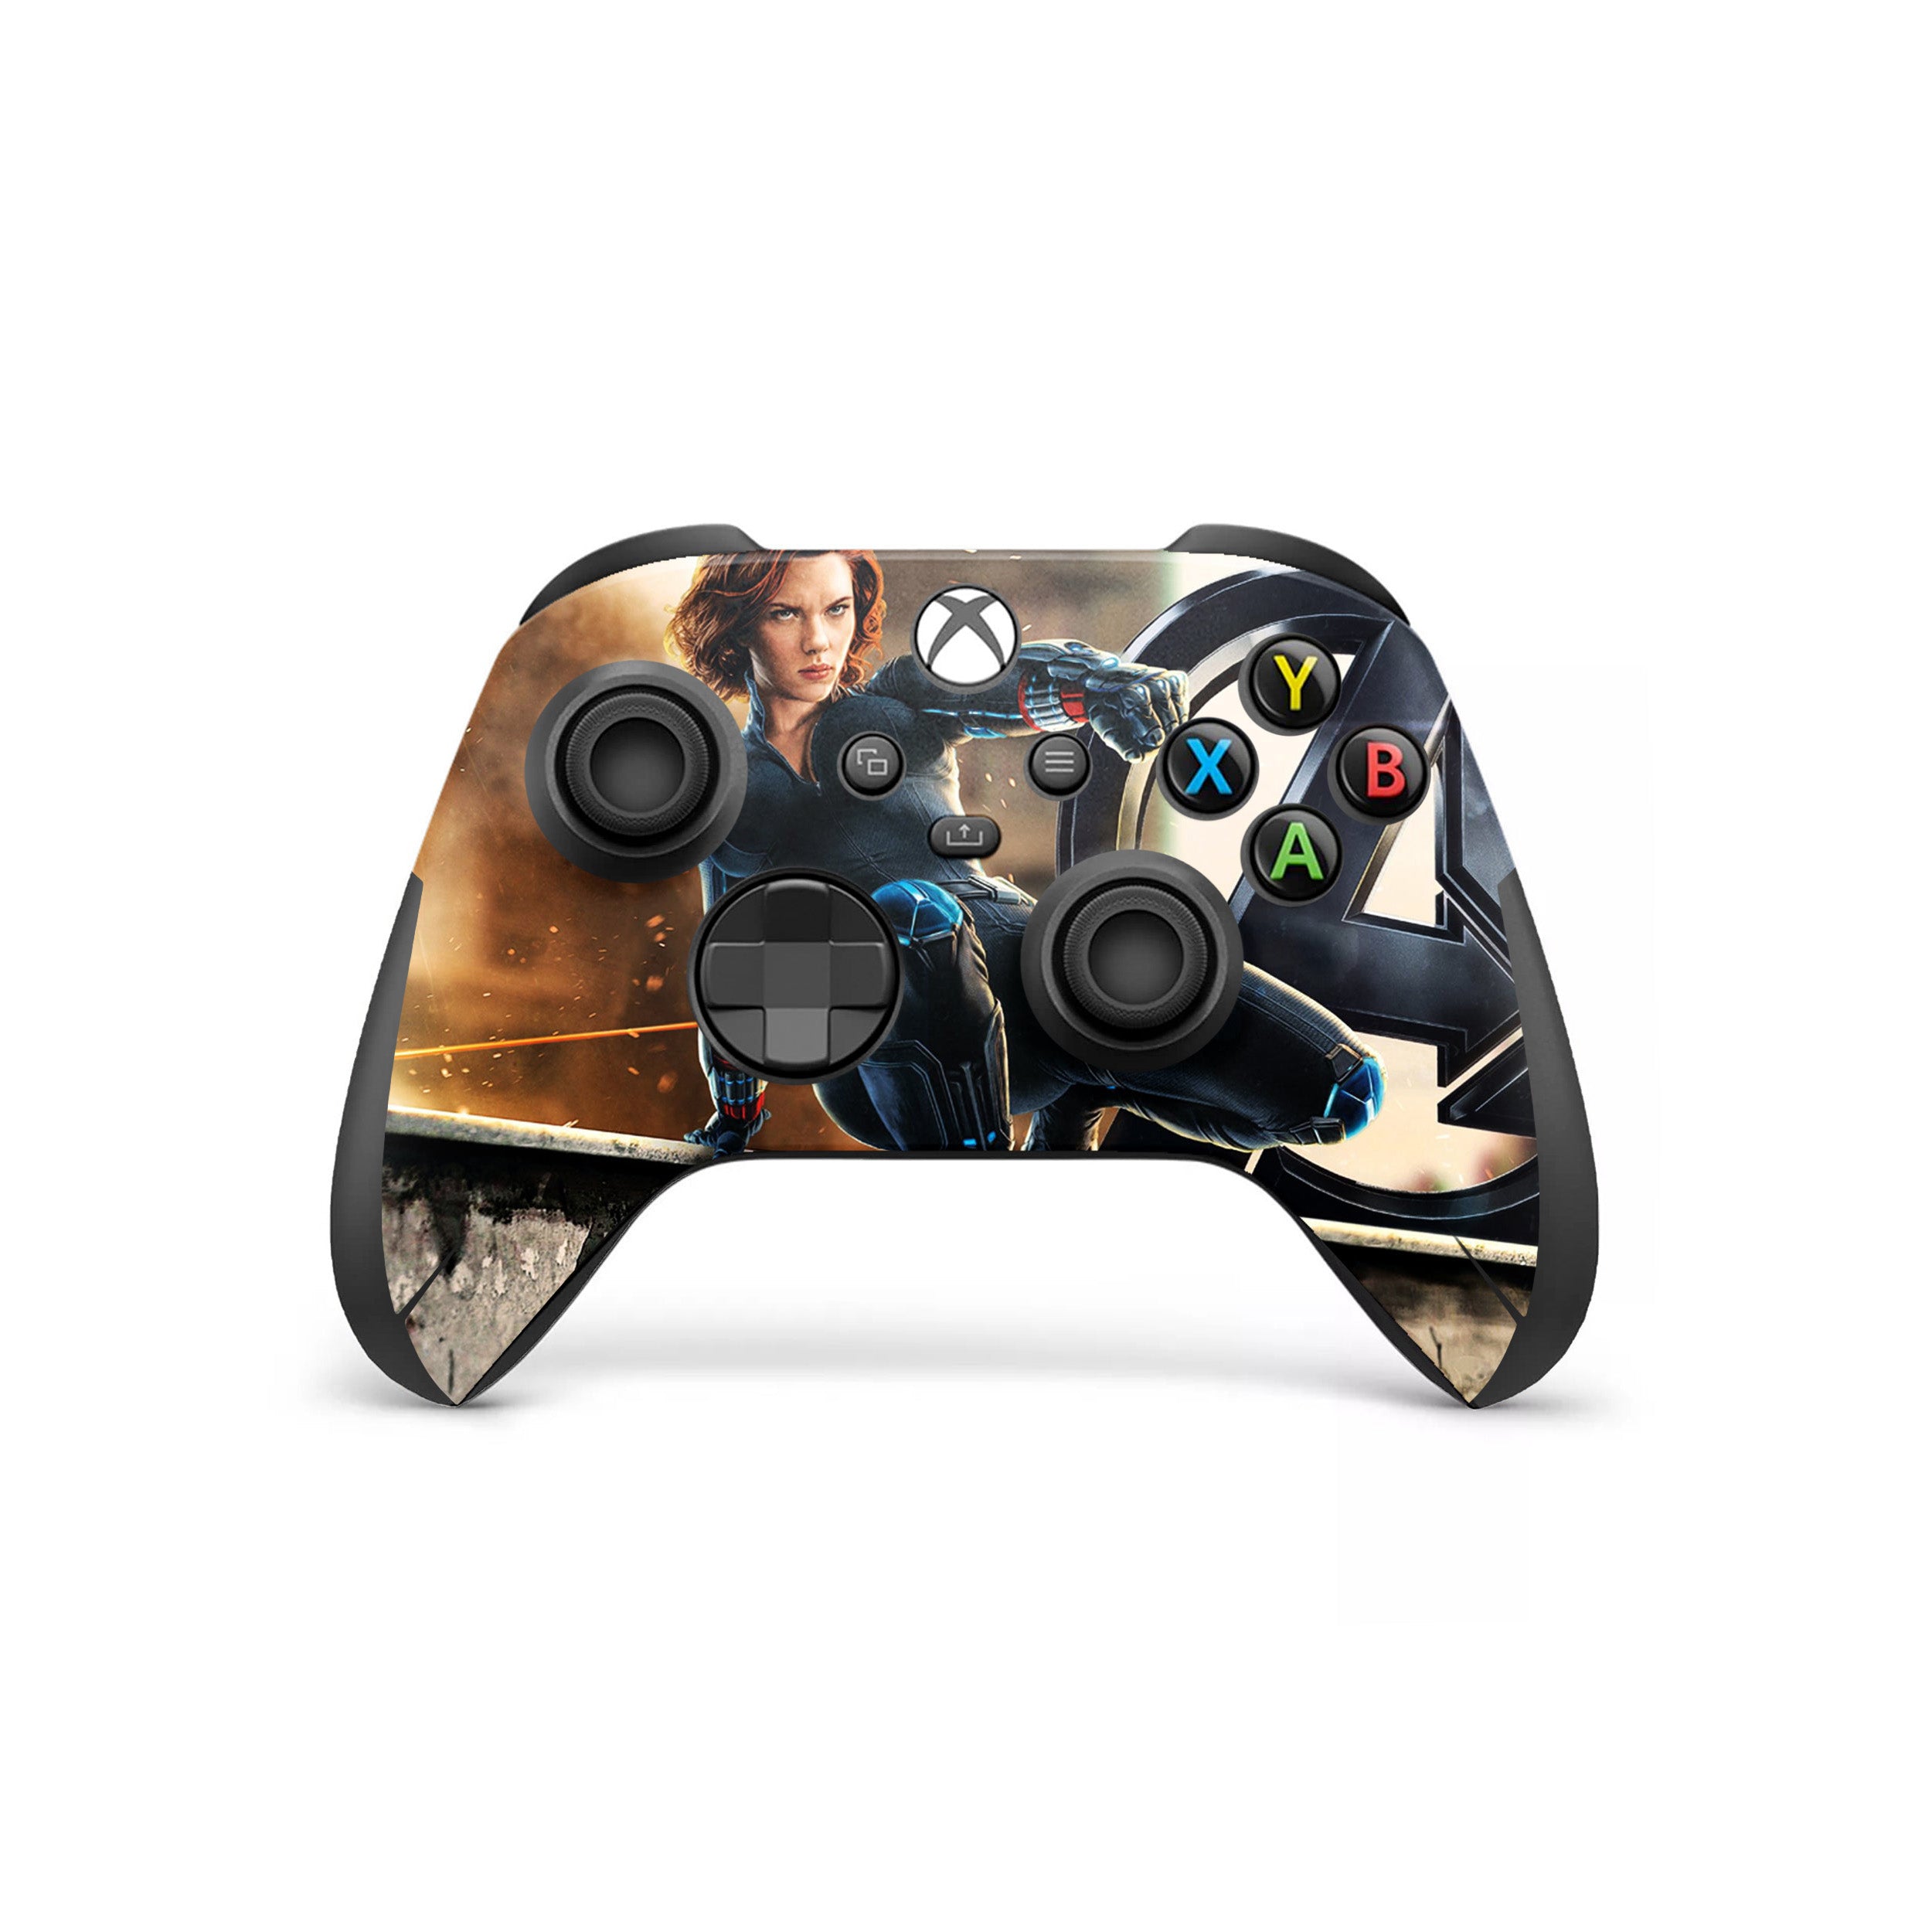 A video game skin featuring a Marvel Black Widow design for the Xbox Wireless Controller.